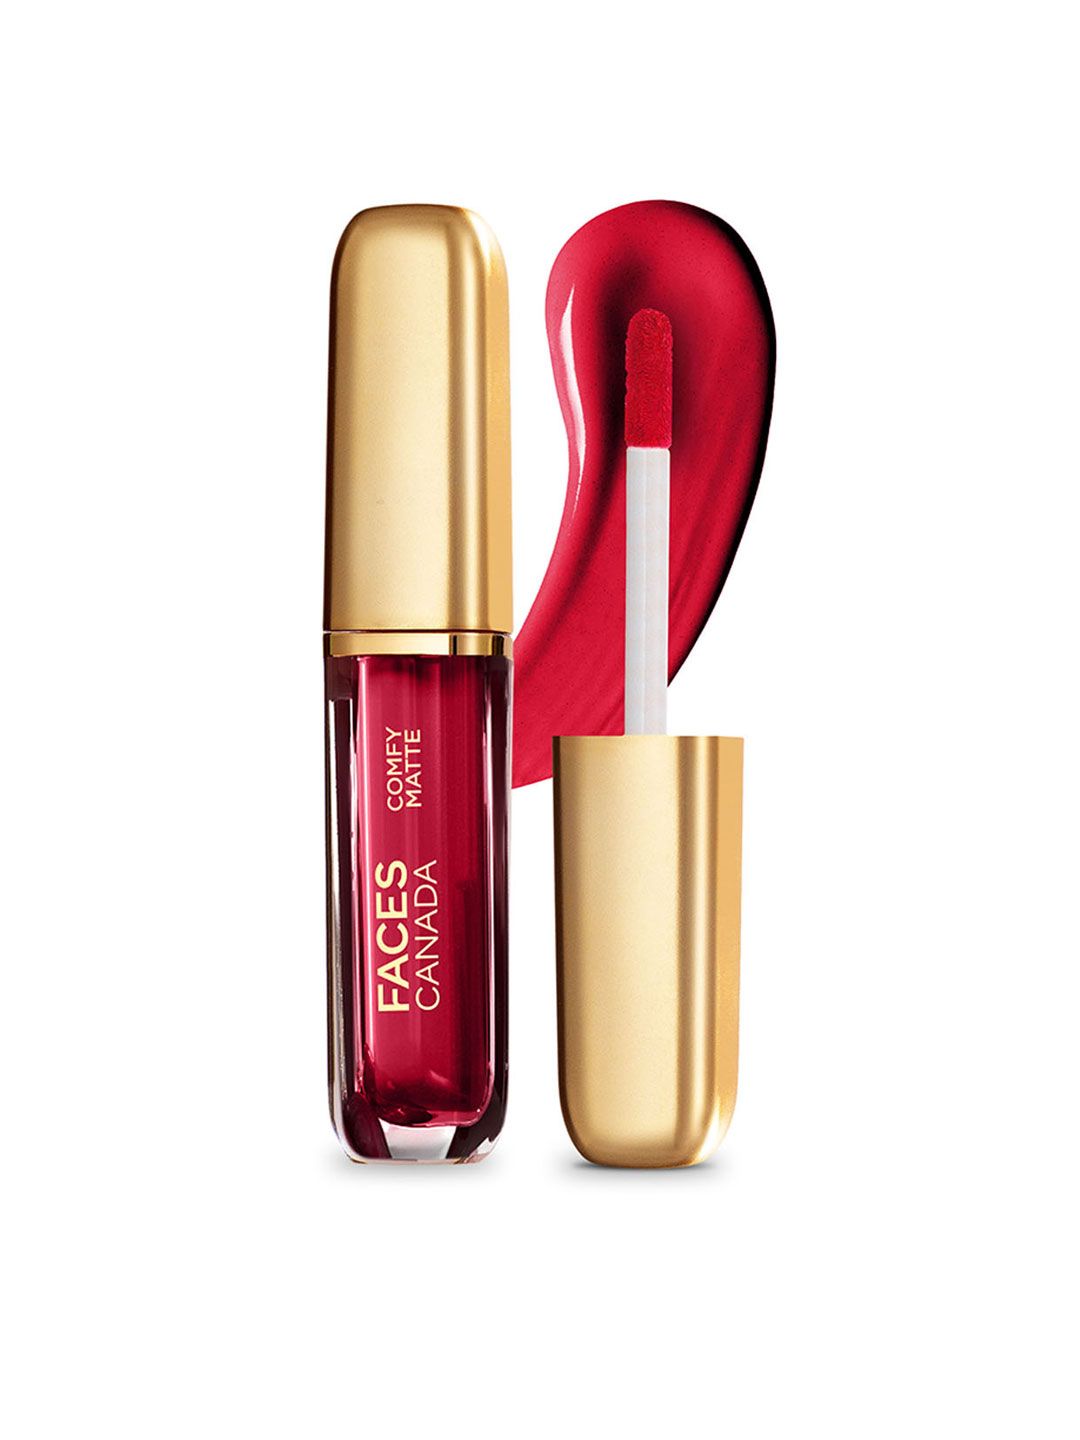 FACES CANADA Comfy Matte Lip Color 3 ml - Getting Ready 02 Price in India